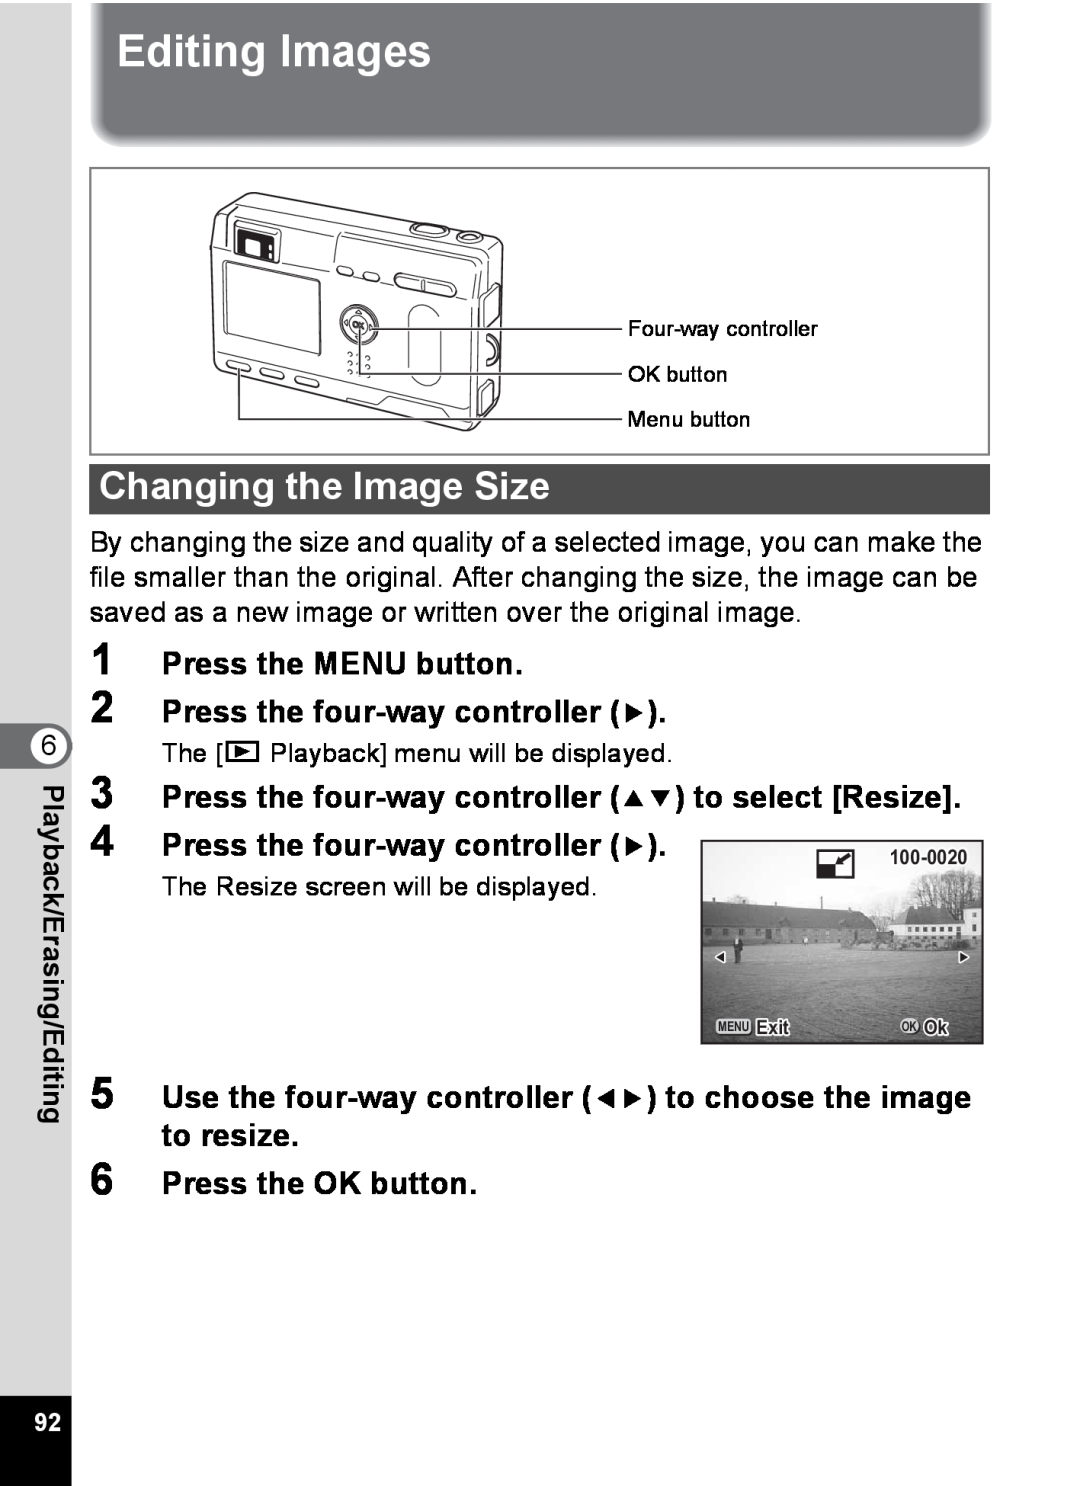 Pentax S4 manual Editing Images, Changing the Image Size, Press the MENU button 2 Press the four-way controller 